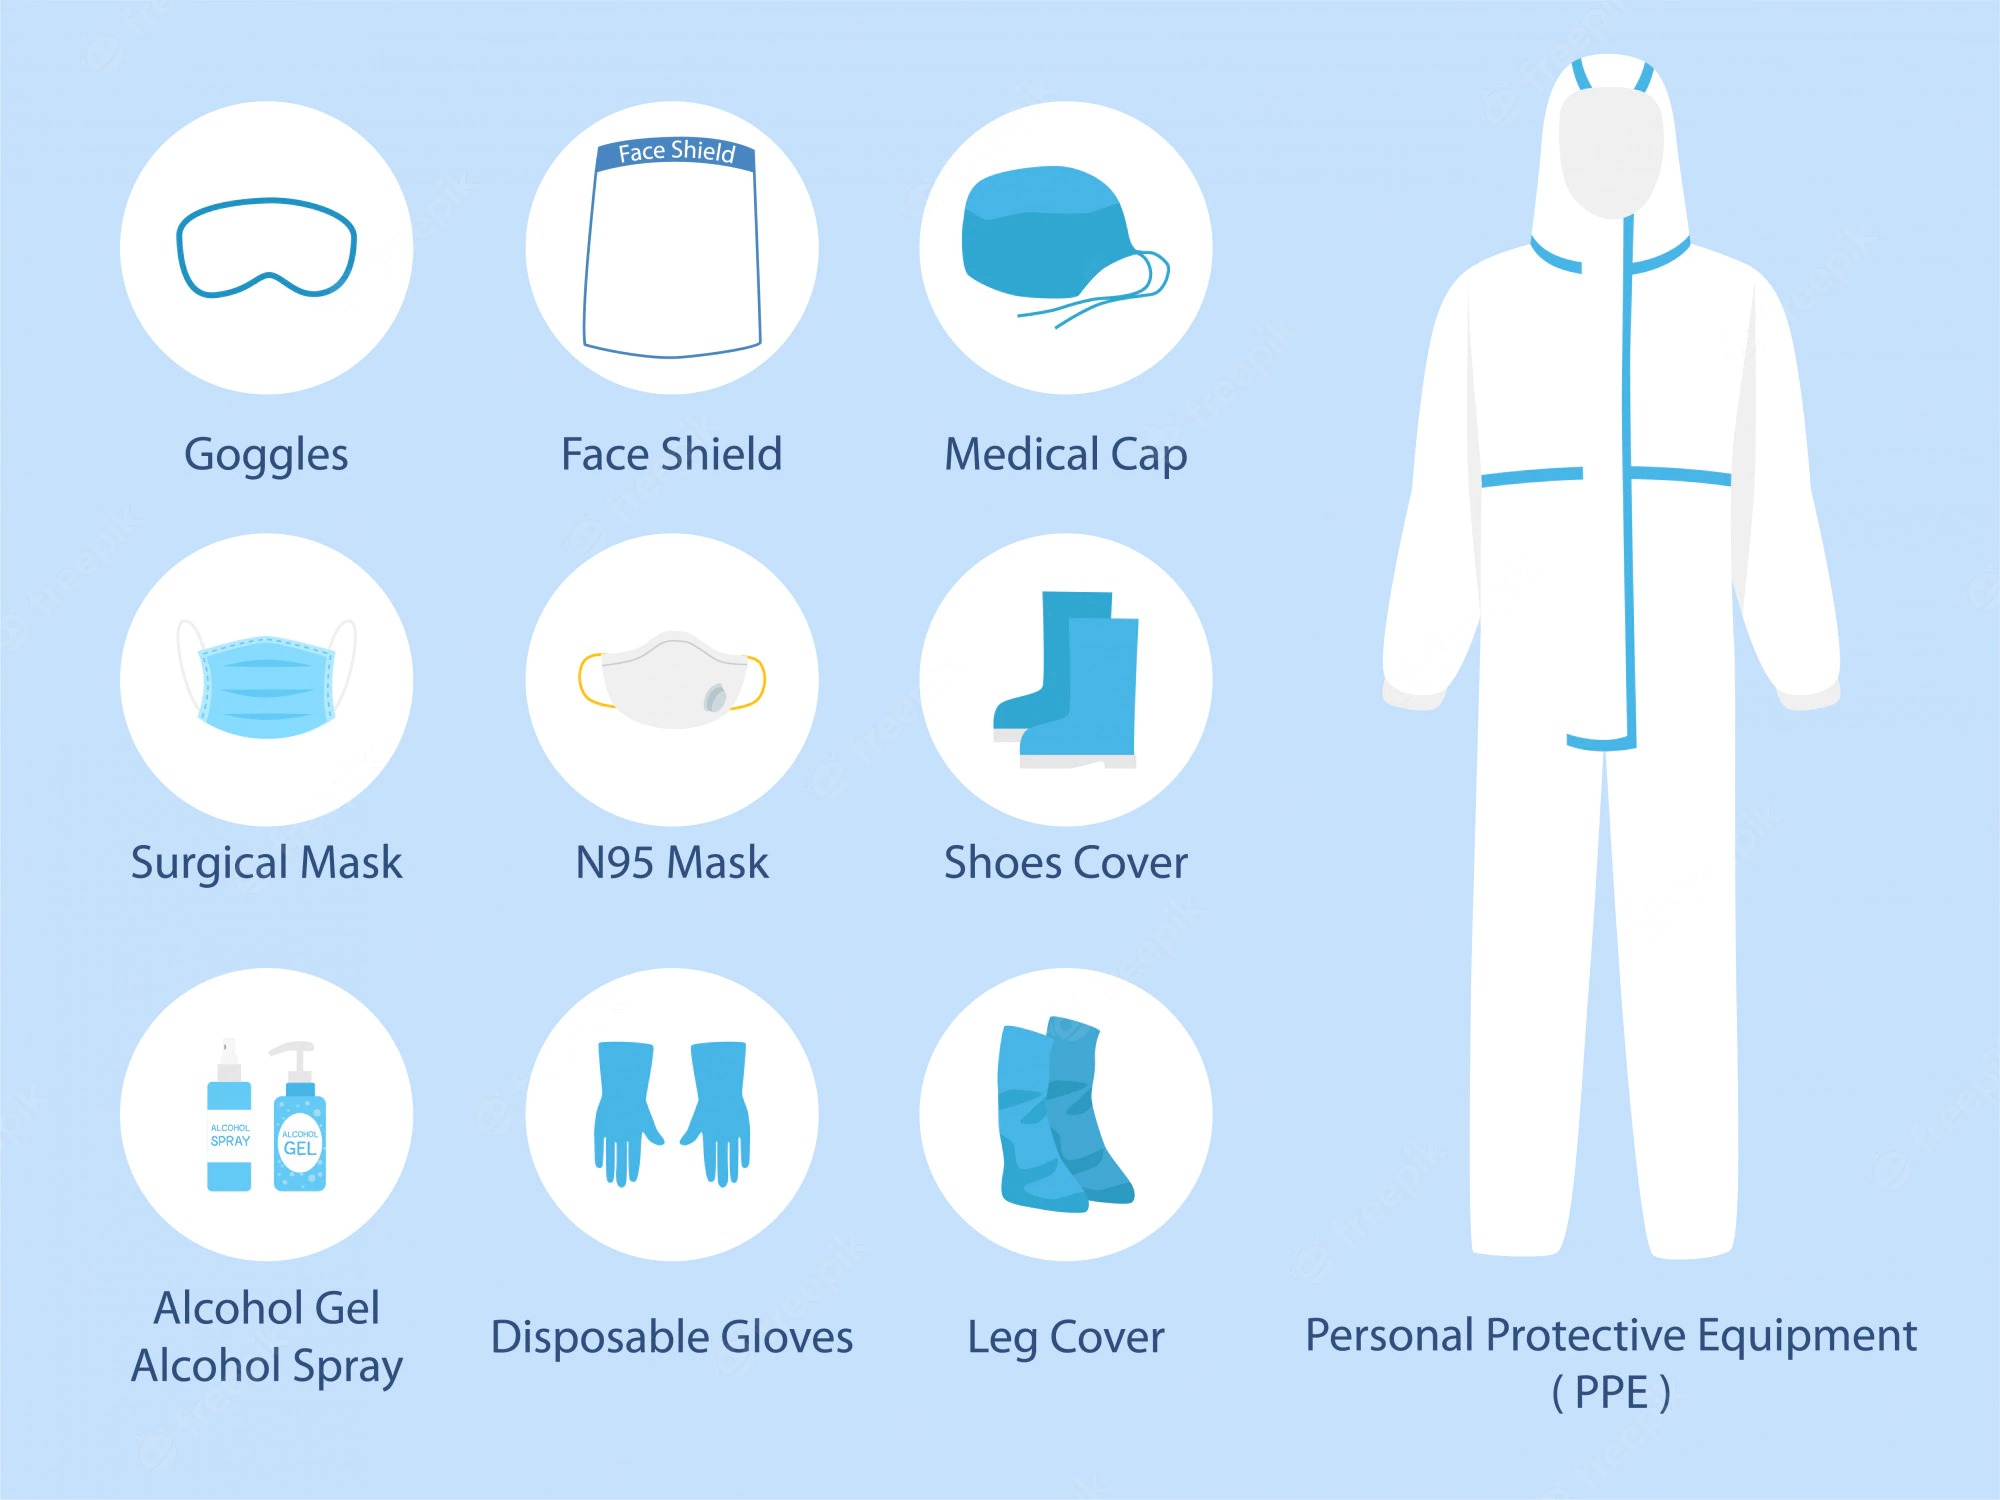 3 Basic Types of the Personal Protective Equipment